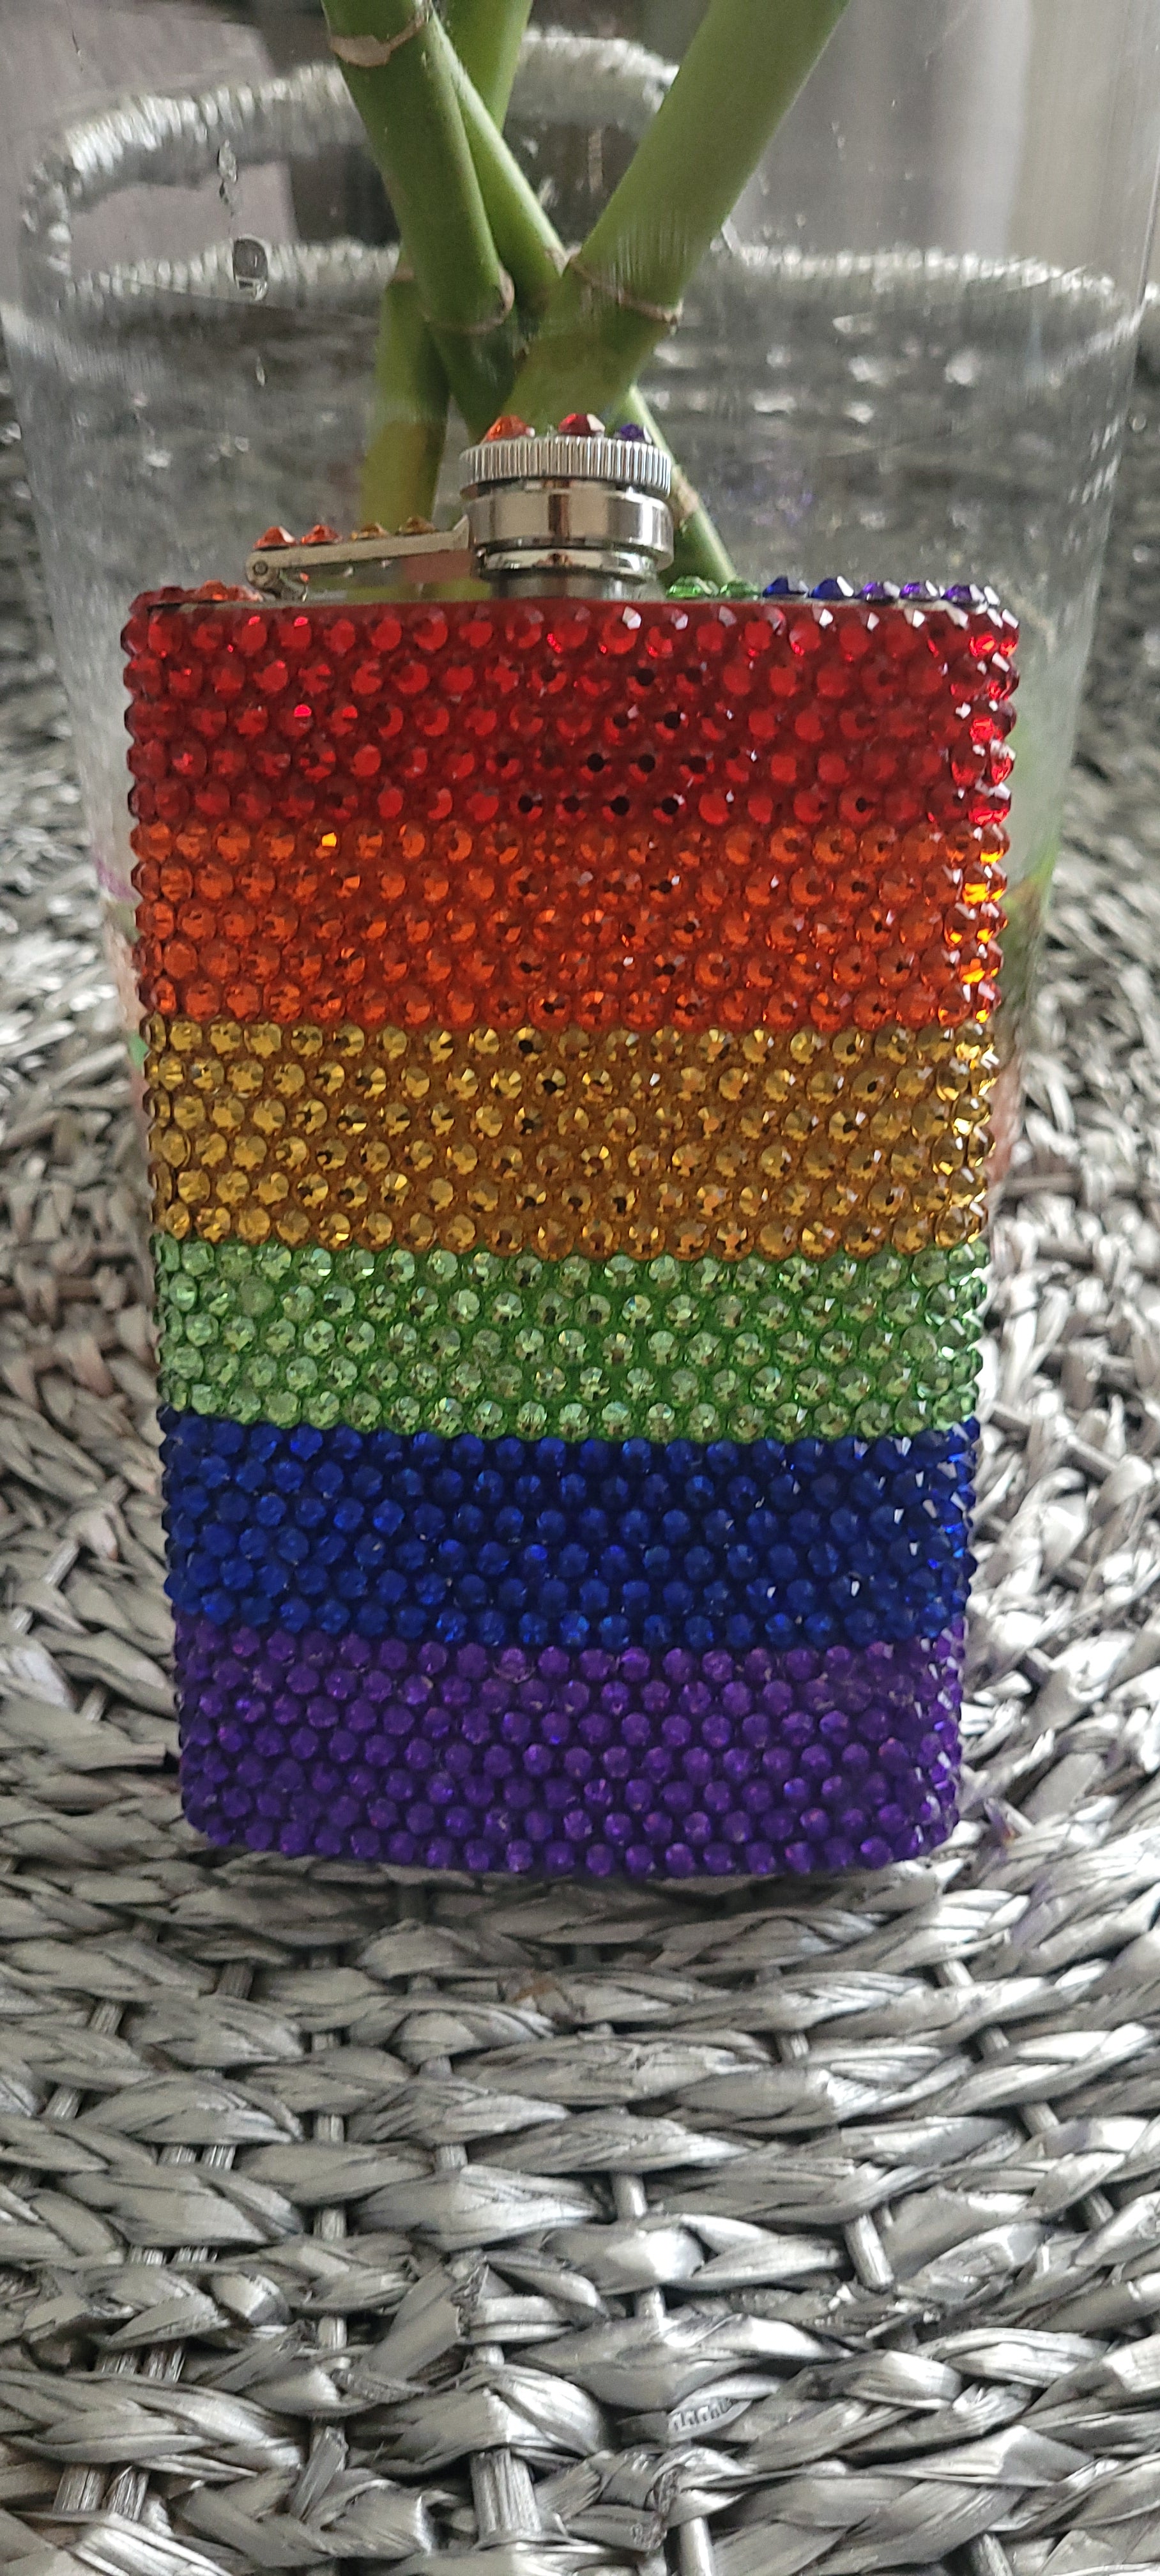 "Pride" Bling 6oz Stainless Steel Flask - New item promo sale ends Friday